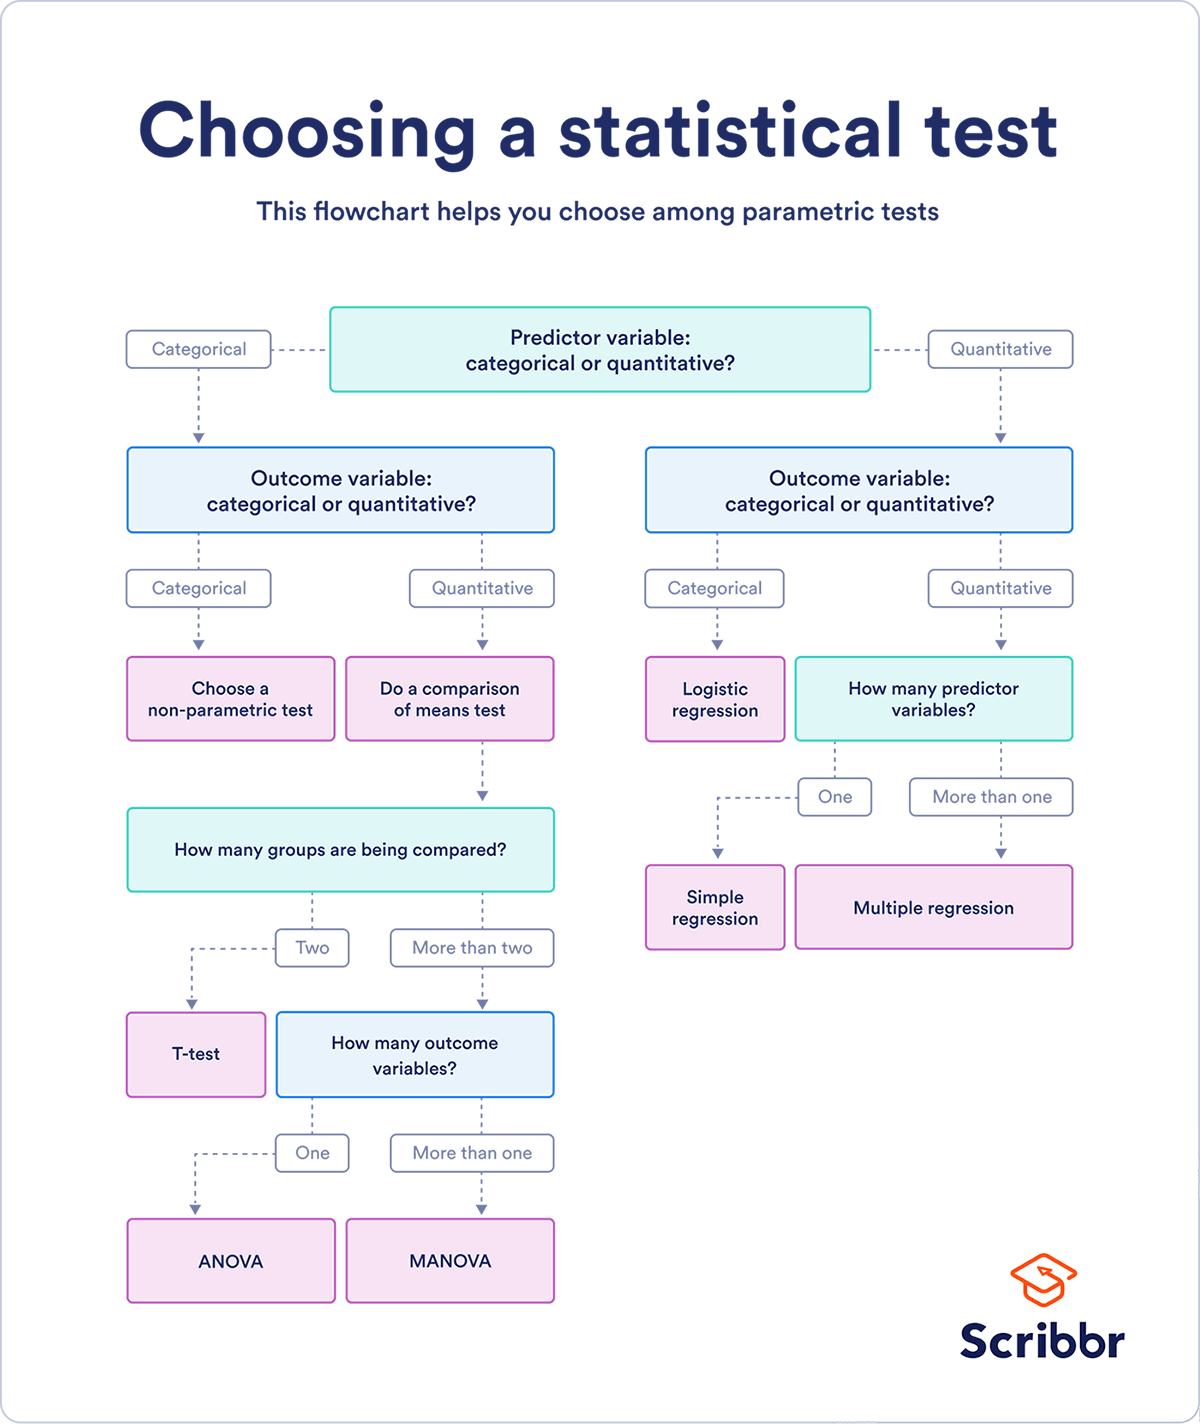 Choosing the right statistical test